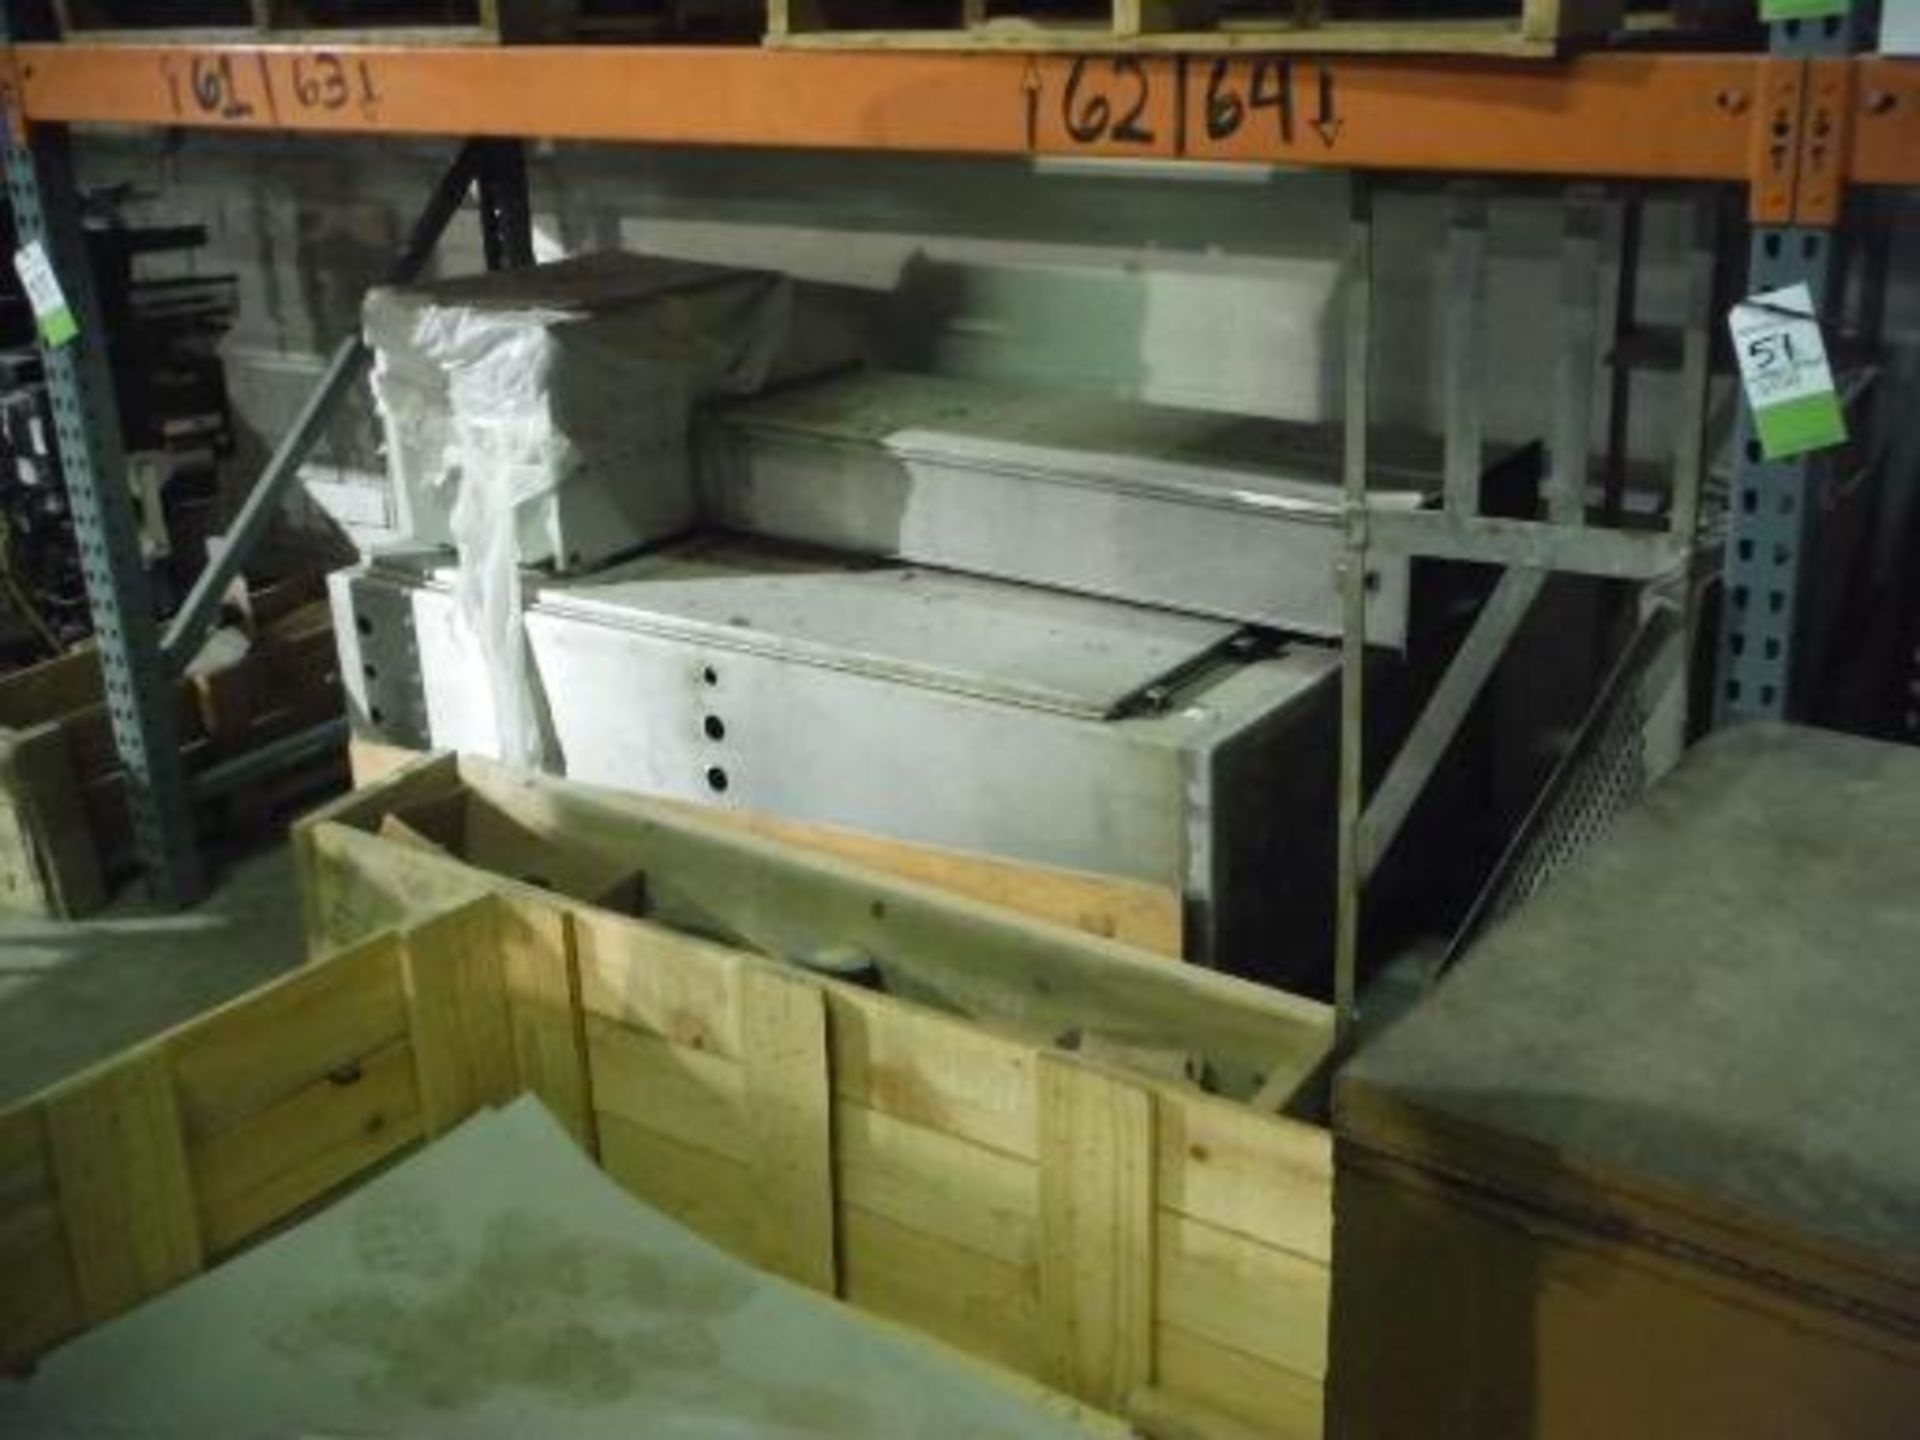 Contents of Shelf (pallet slot 63-64): S.S. Control Panel and Cart (ET-25971) Located In Farmers